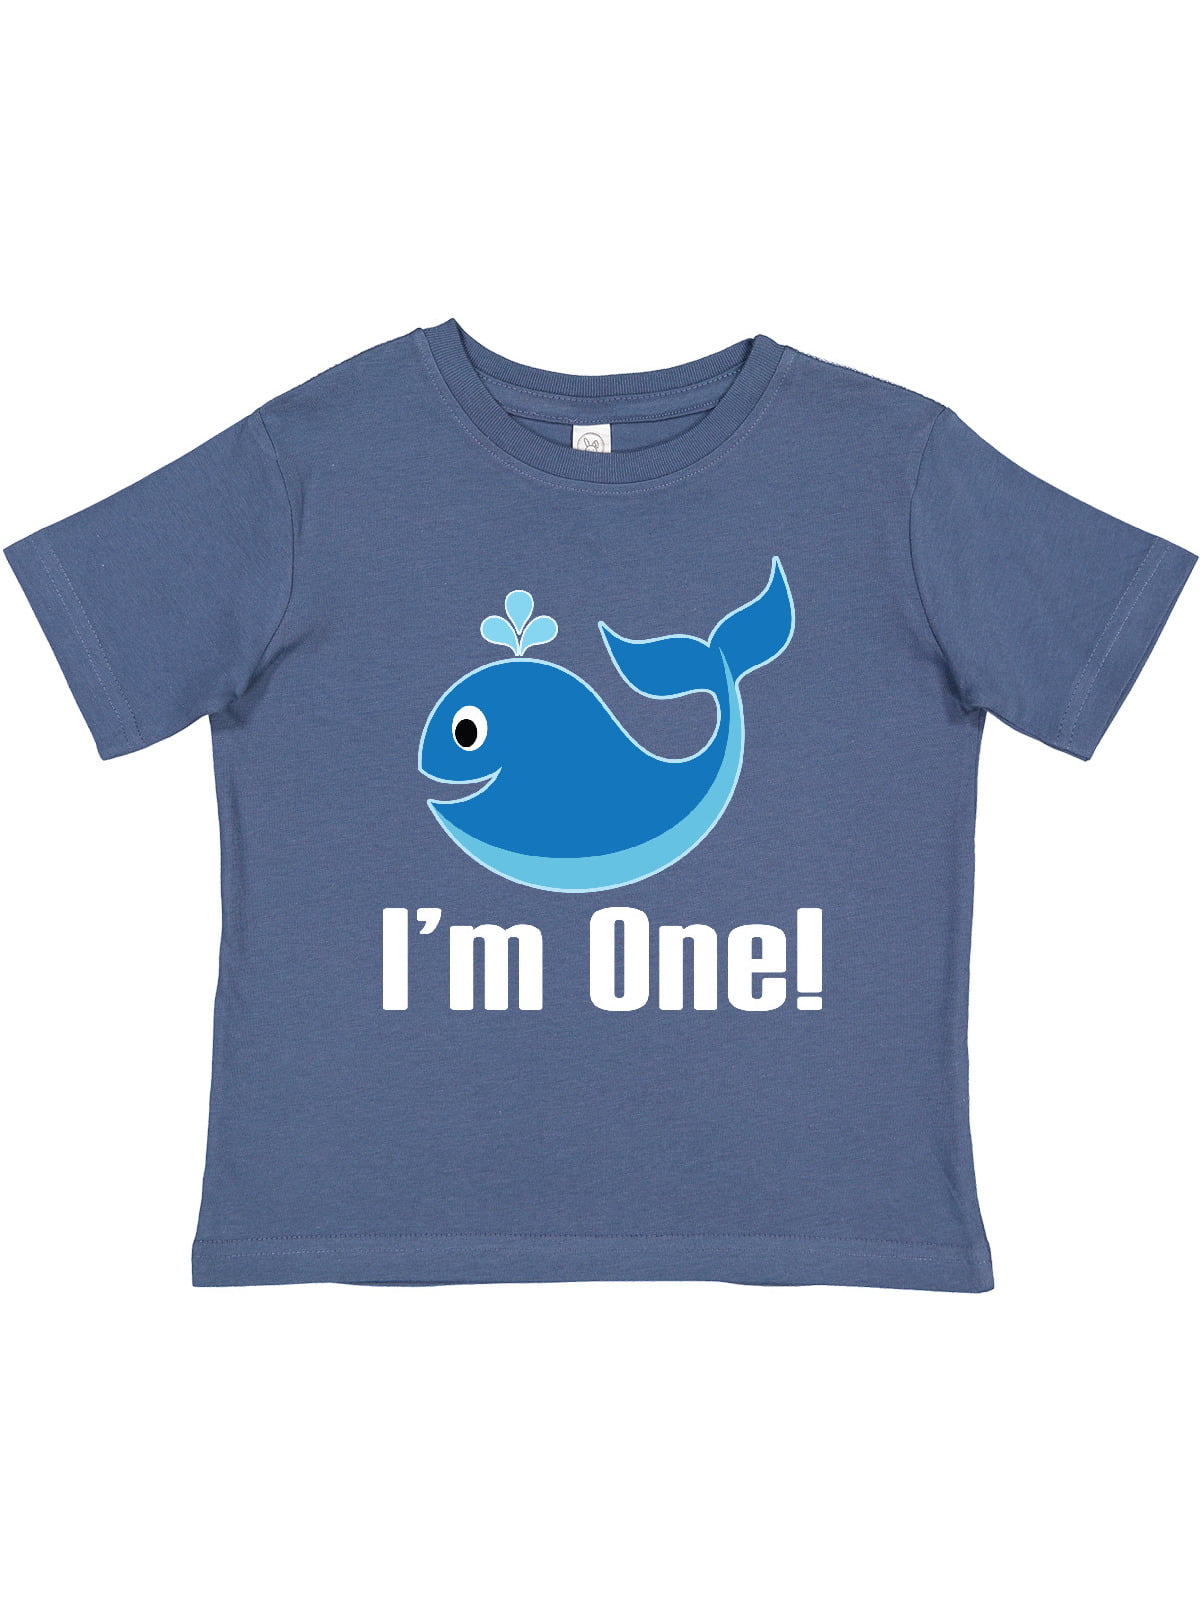 Corn Silk Whale Fish Kids T Shirt Funny Graphic Gift For Boys Girls Childrens Tee#P1#OR#A 